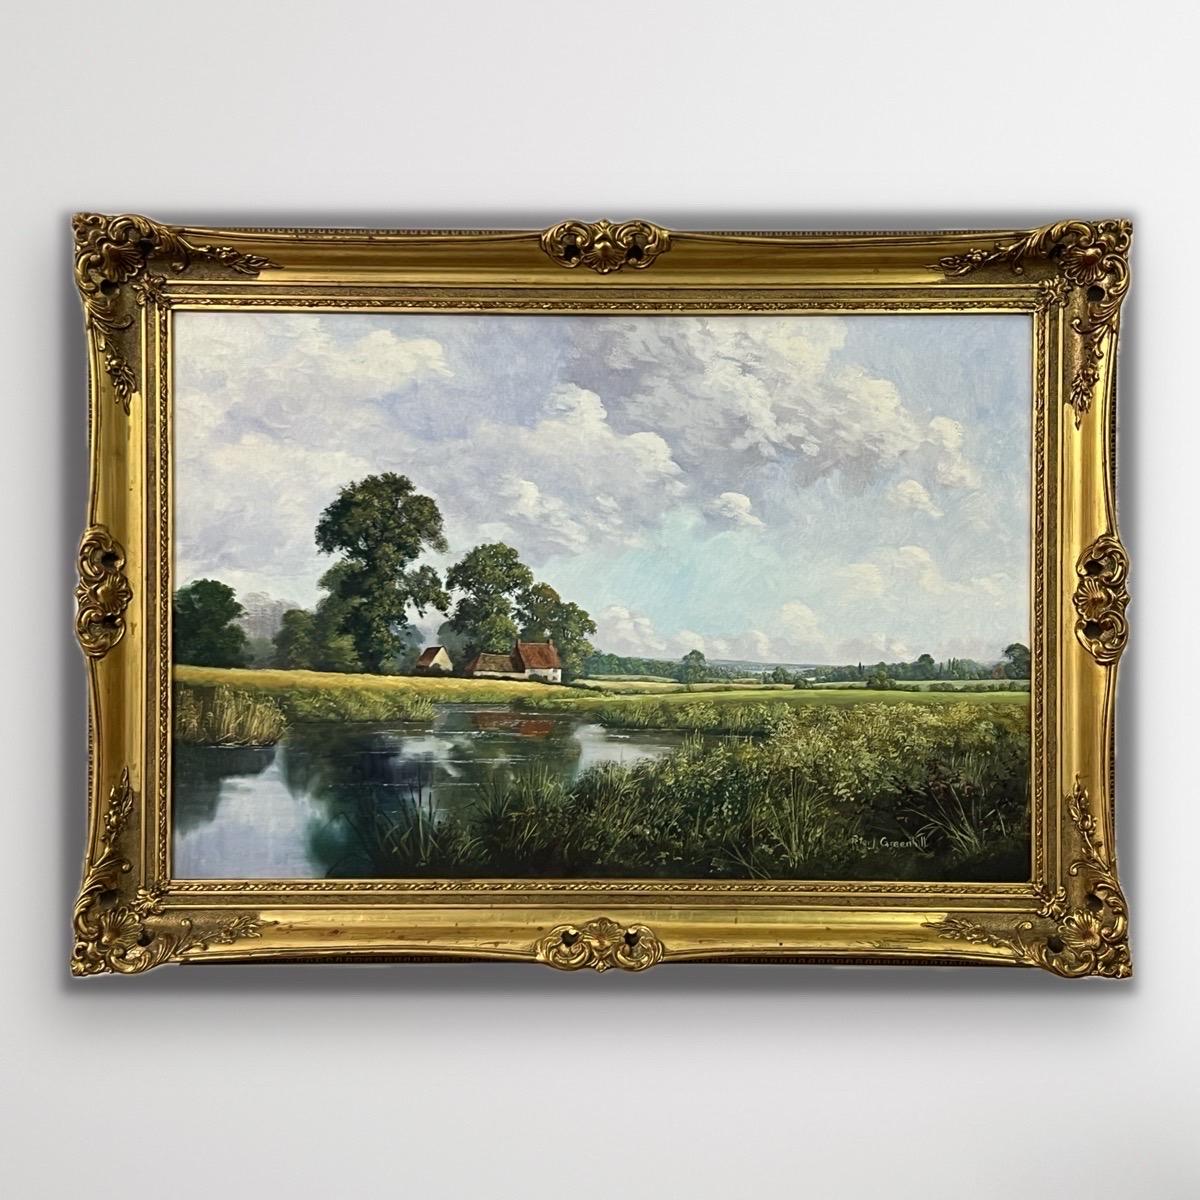 Farmhouse by a River in the English Countryside by 20th Century British Artist - Painting by Peter J Greenhill